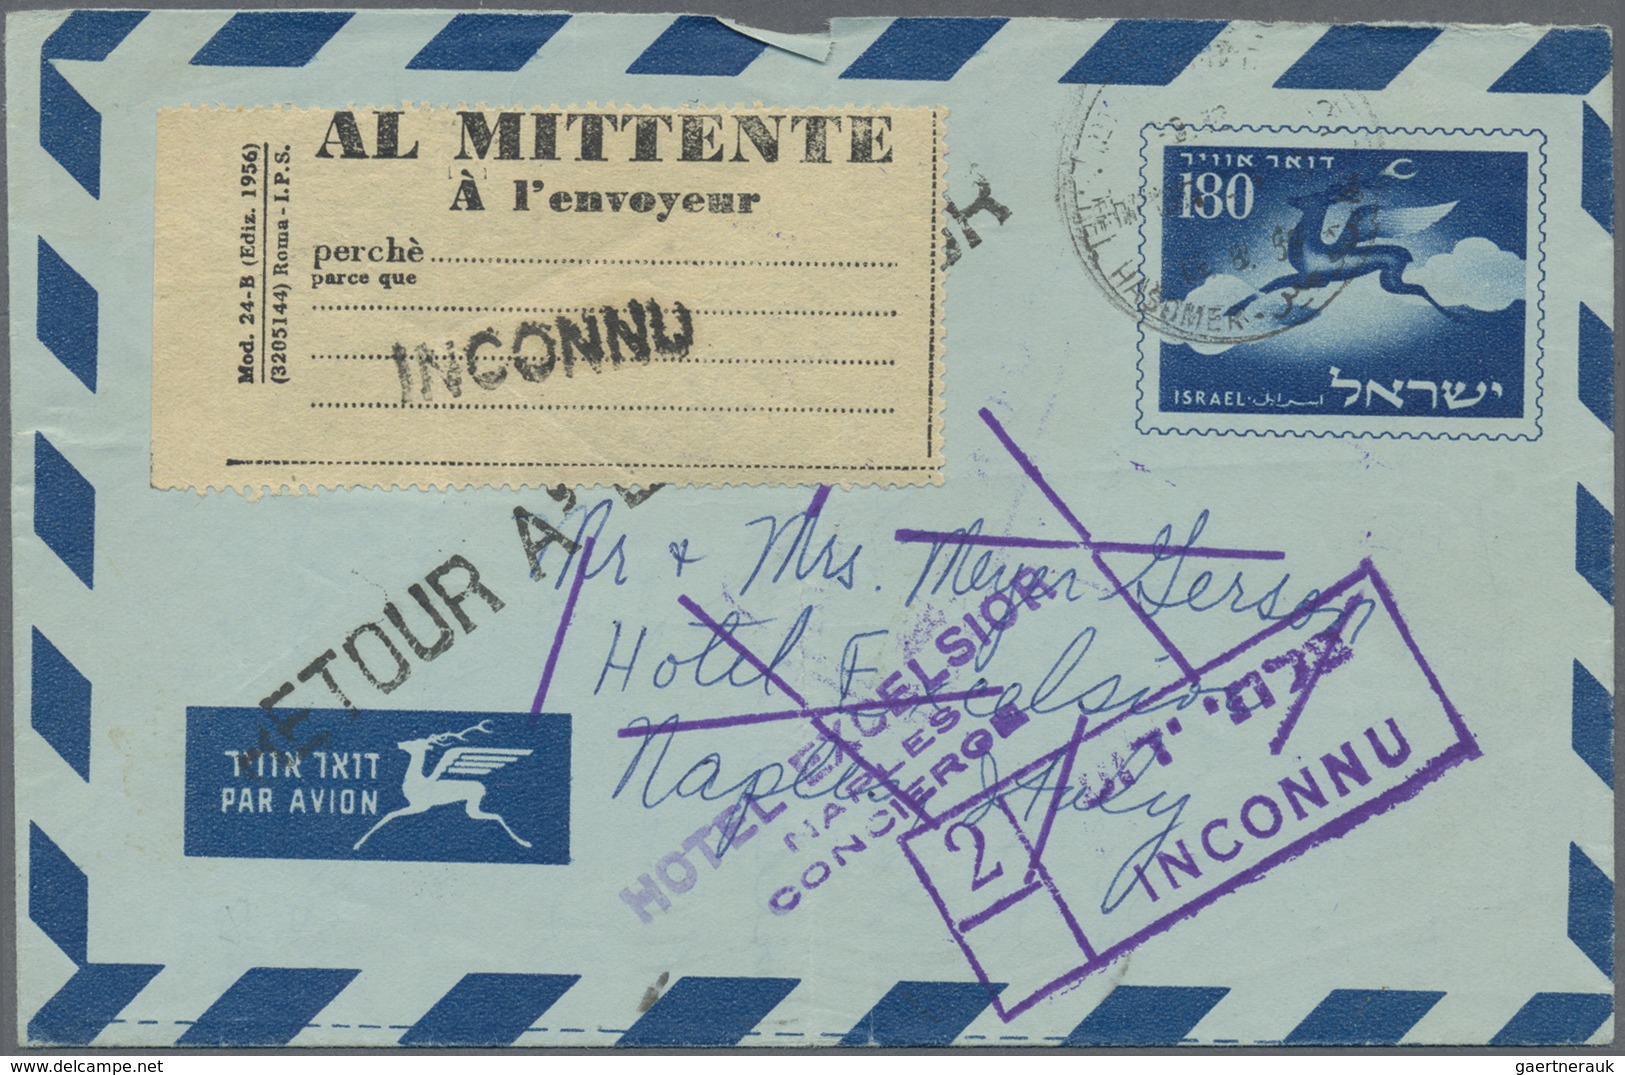 Br/GA Israel: 1949/1959, holding of apprx 210 covers/cards/used stationeries, comprising commercial and ph